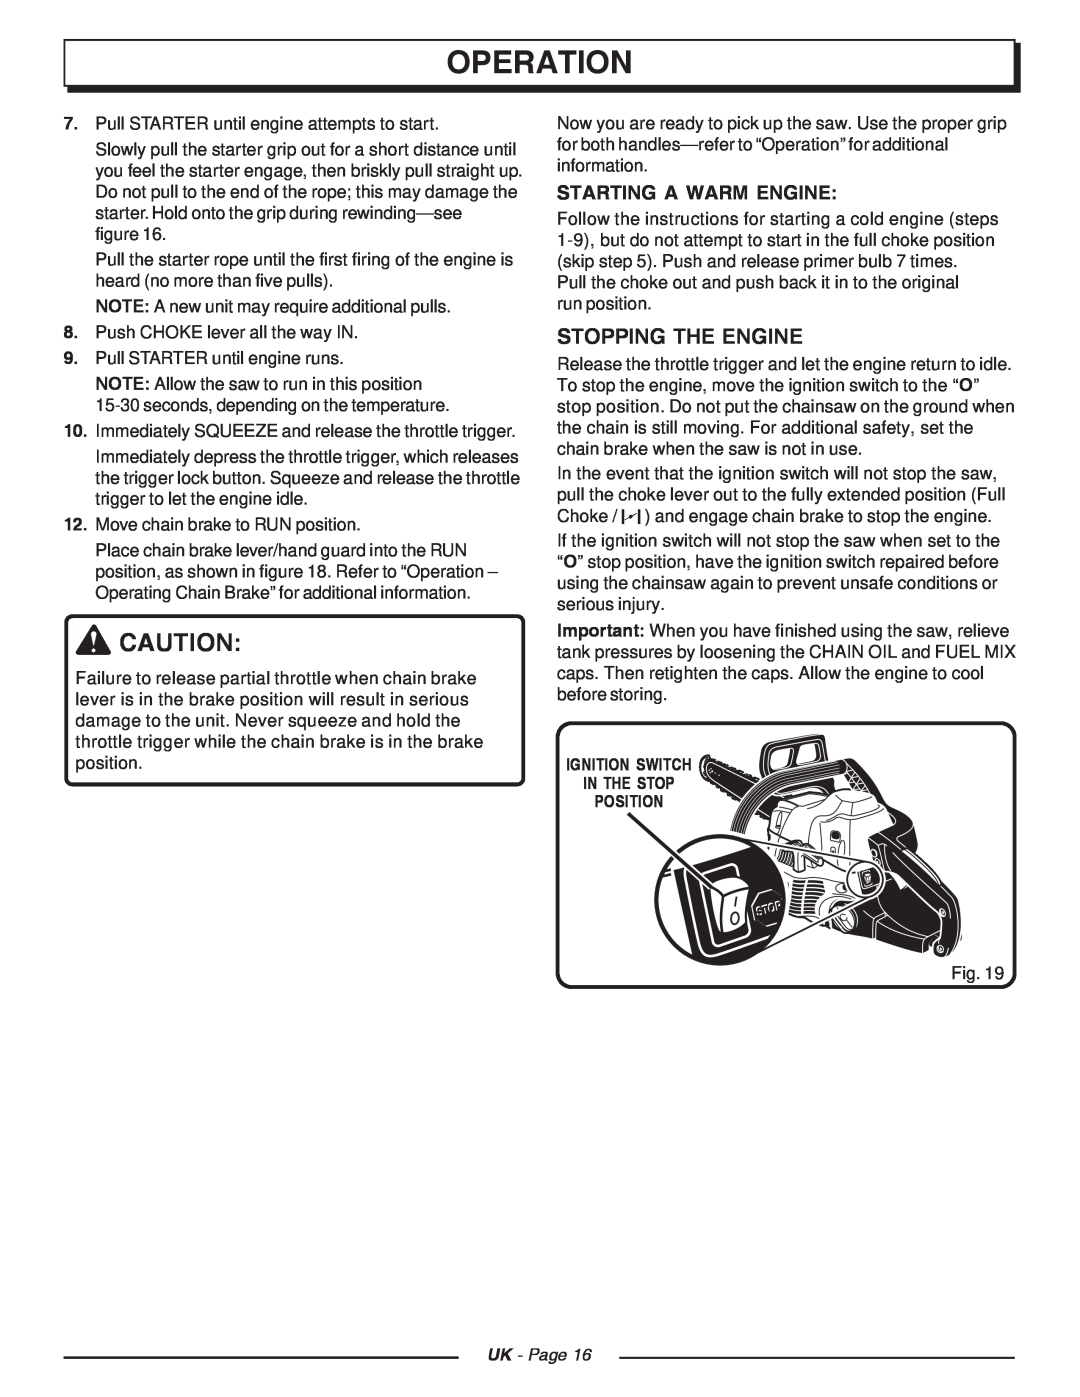 Homelite CSP3816 Stopping The Engine, Starting A Warm Engine, Ignition Switch In The Stop Position, Operation, UK - Page 